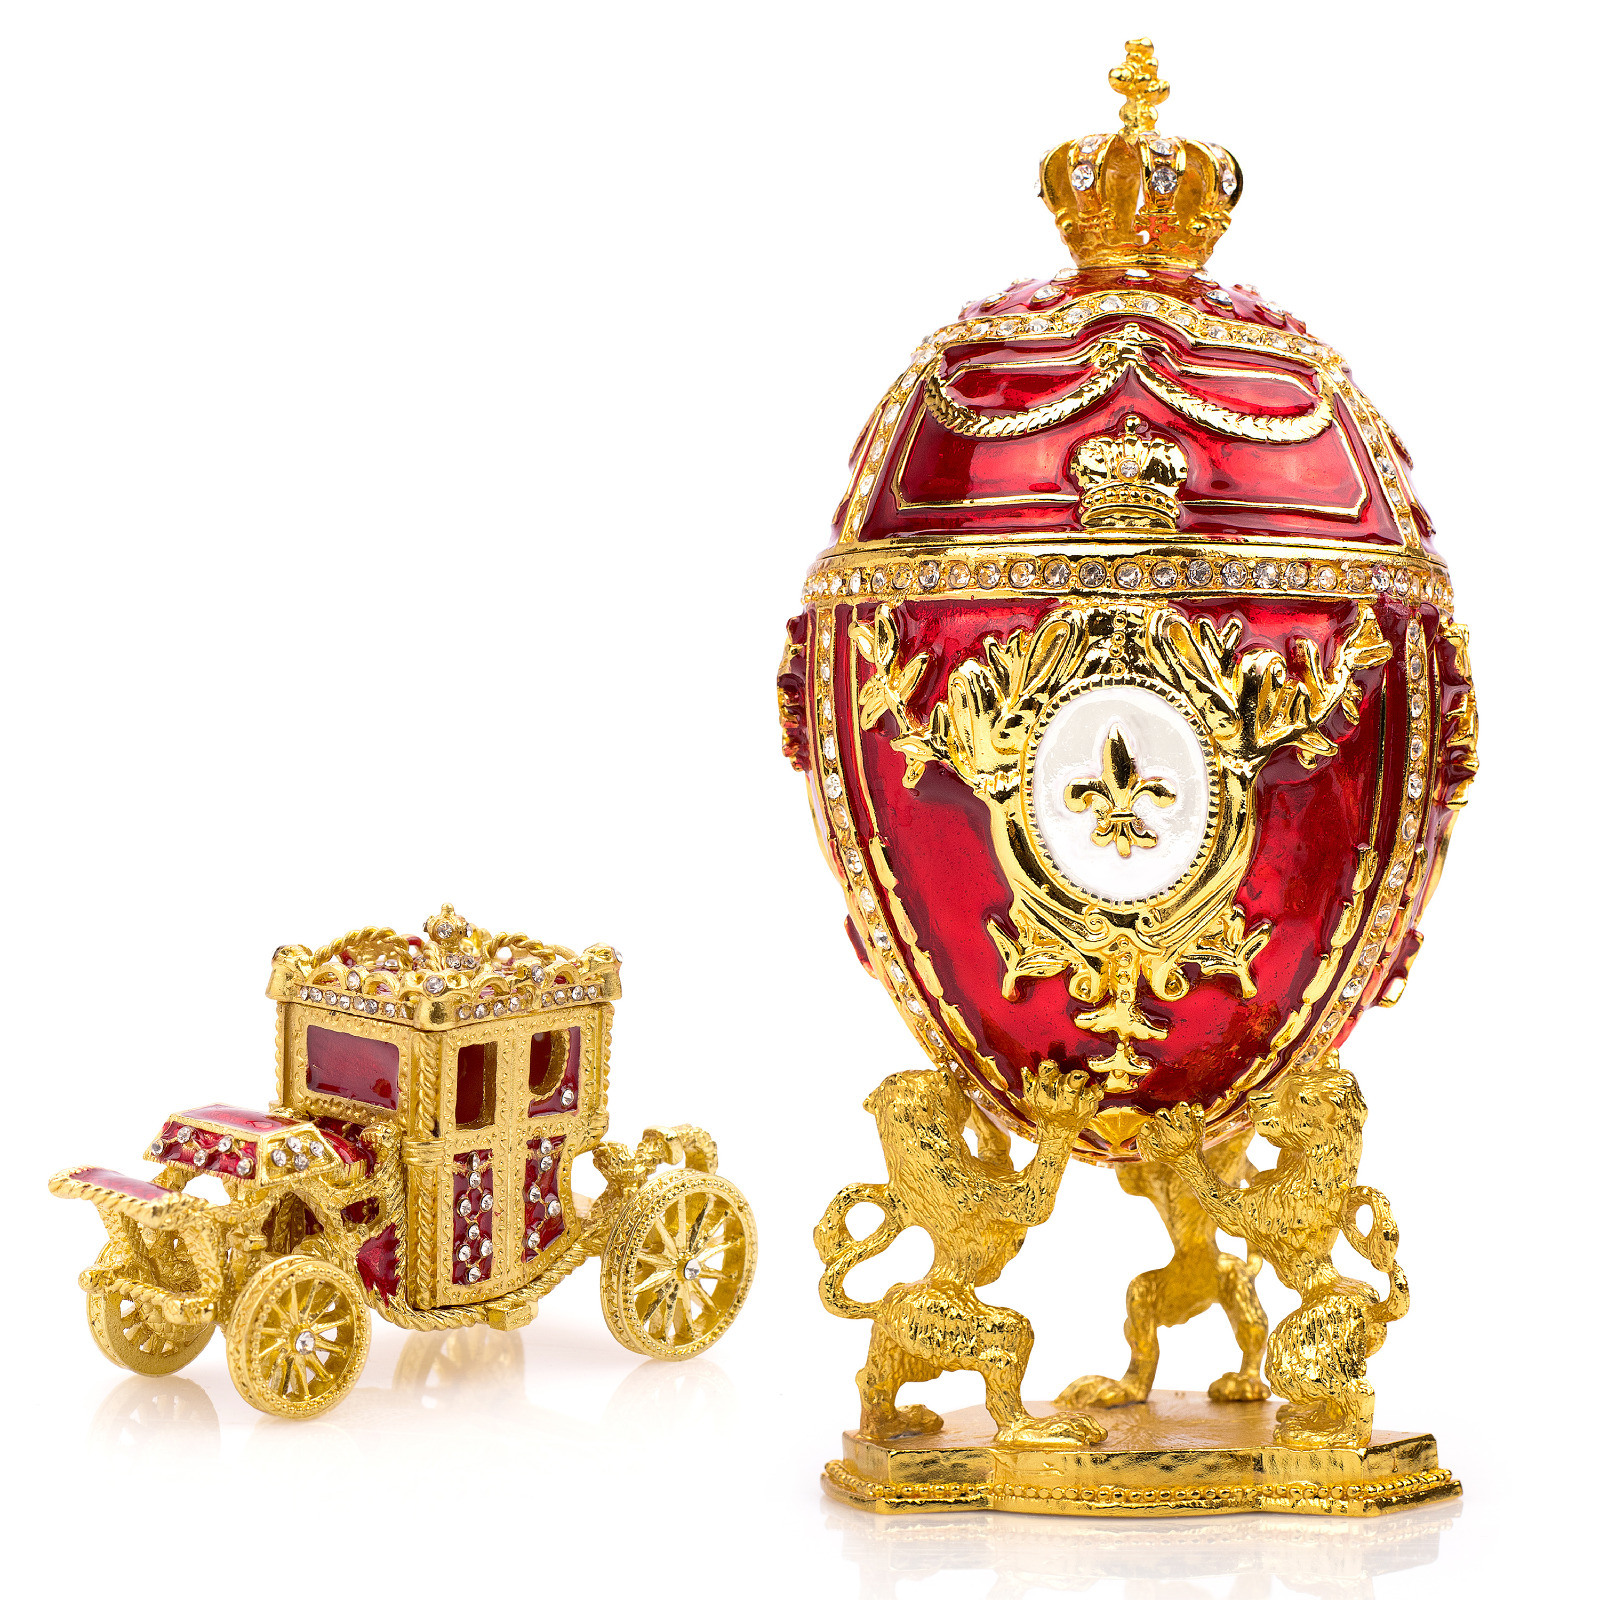 Royal Imperial Red Faberge Egg Replica : Extra Large 6.6 inch + carriage by Vtry